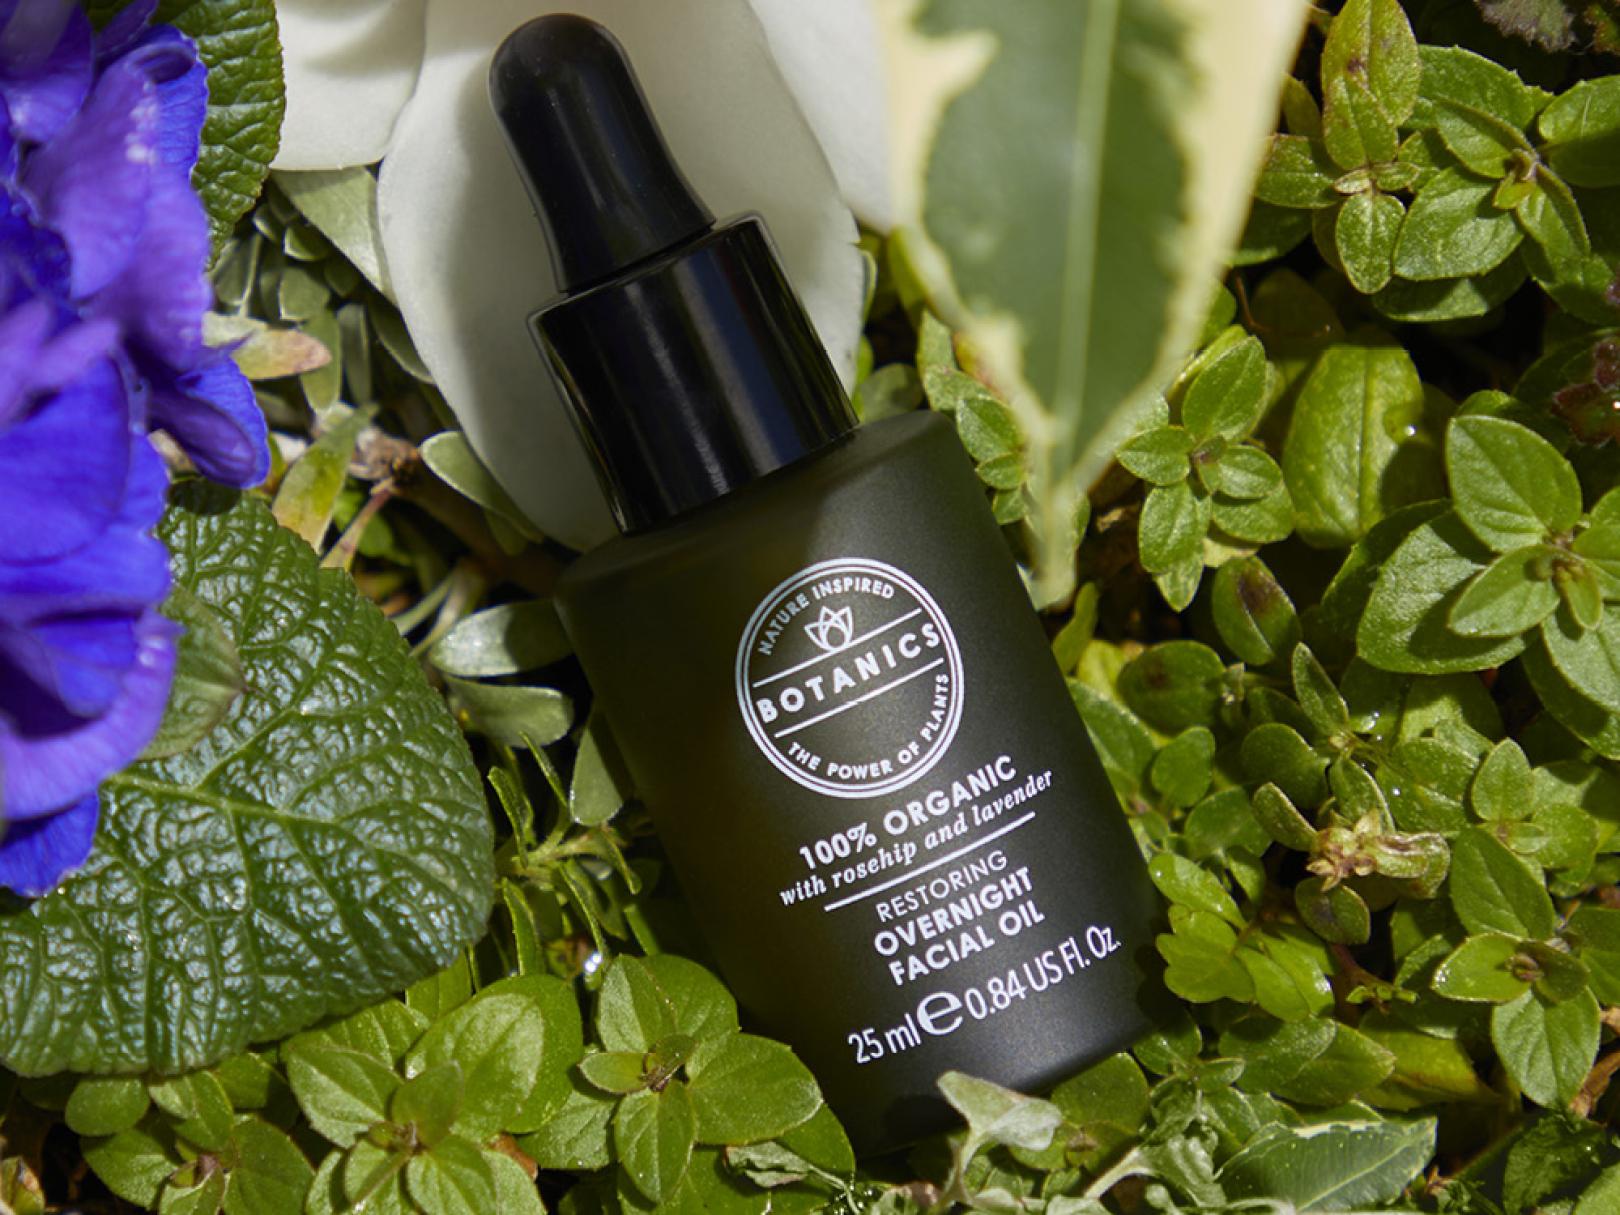 Product shot of 100% Organic Overnight Facial Oil